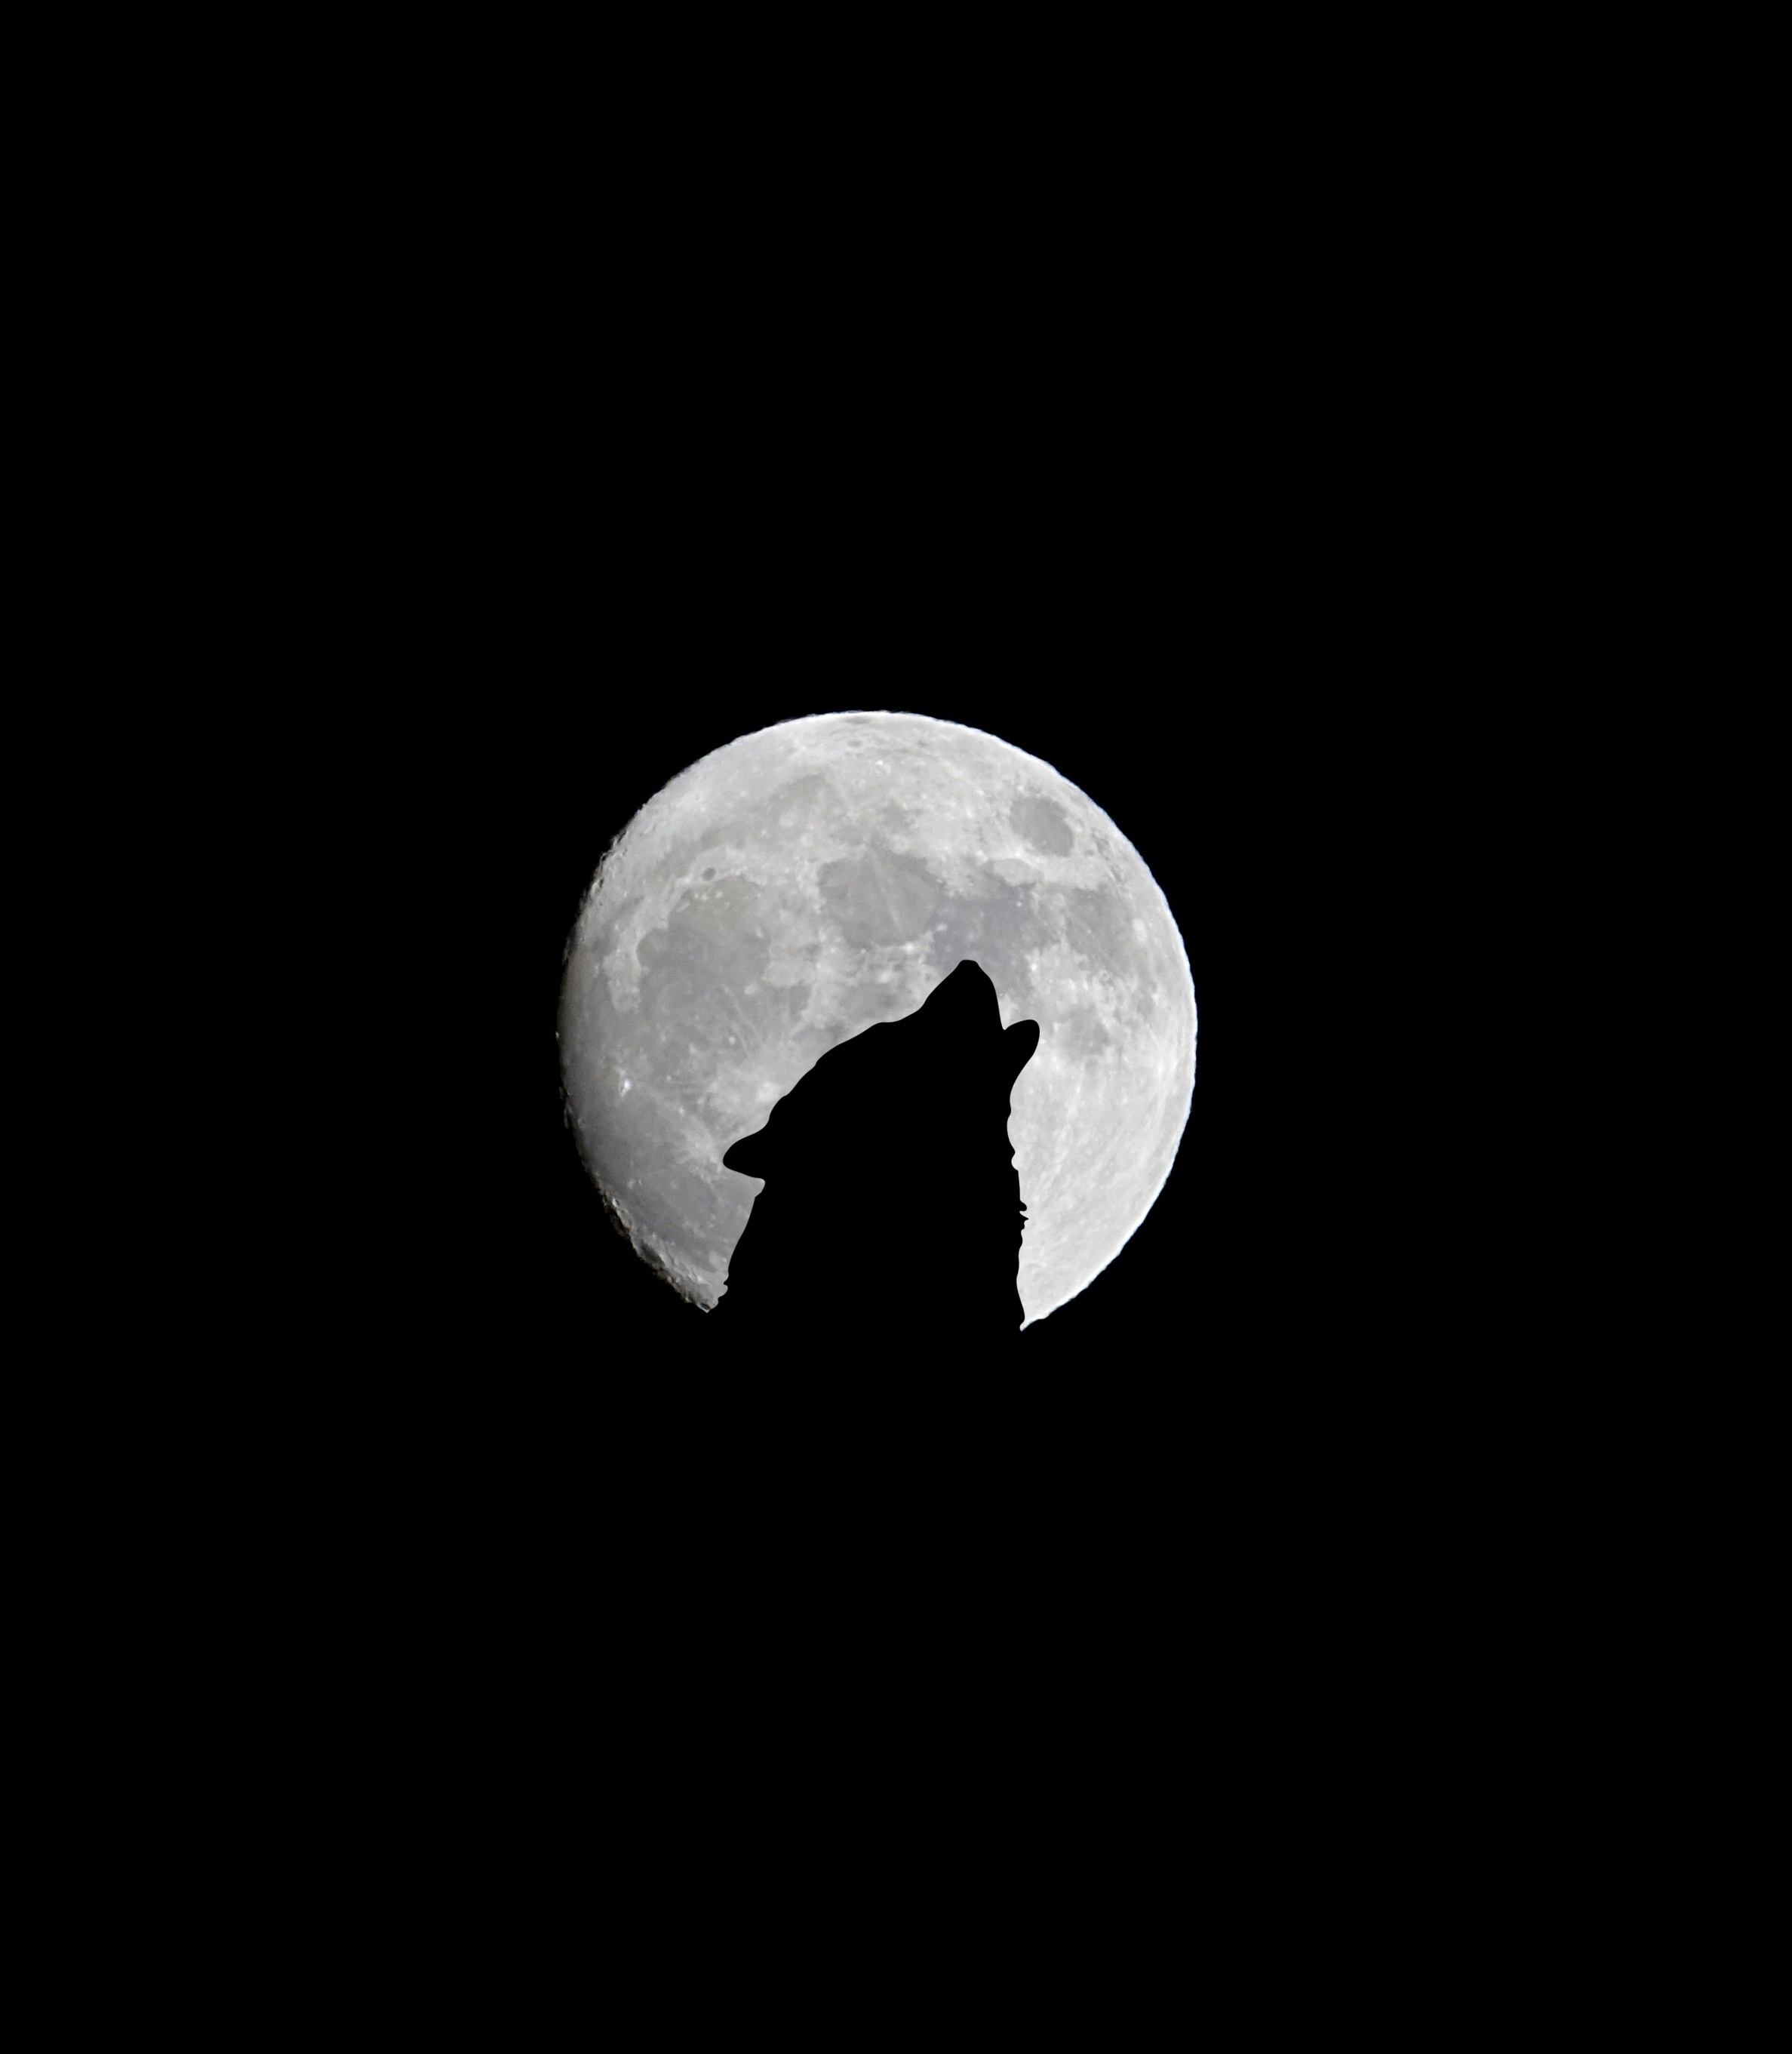 60460 download wallpaper black, wolf, bw, chb, full moon, howl screensavers and pictures for free